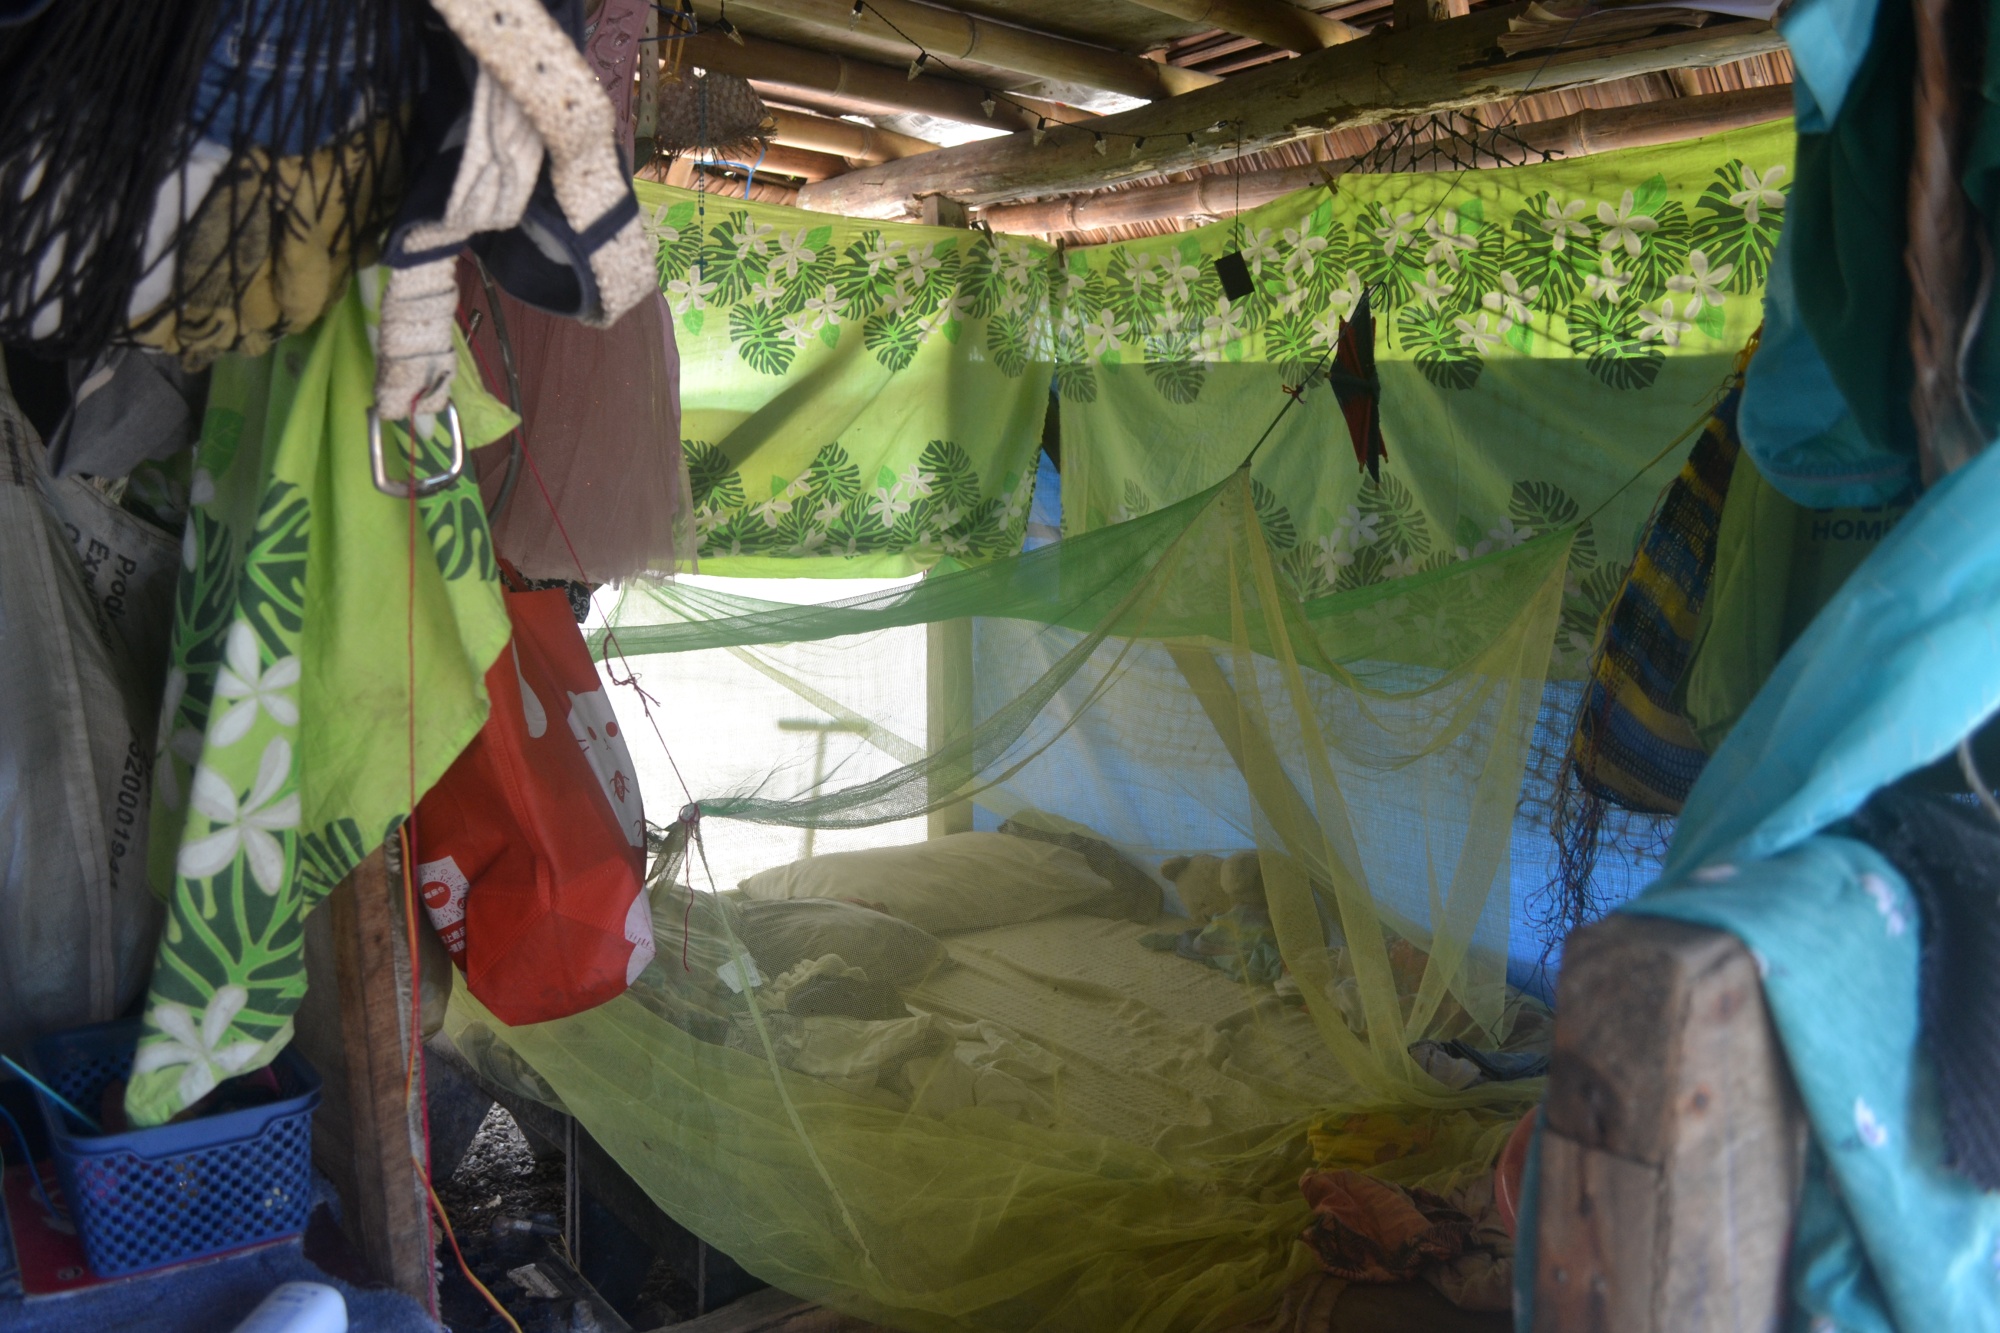 Rise in Malaria Cases Tied Mosquito Net Changes - Bloomberg